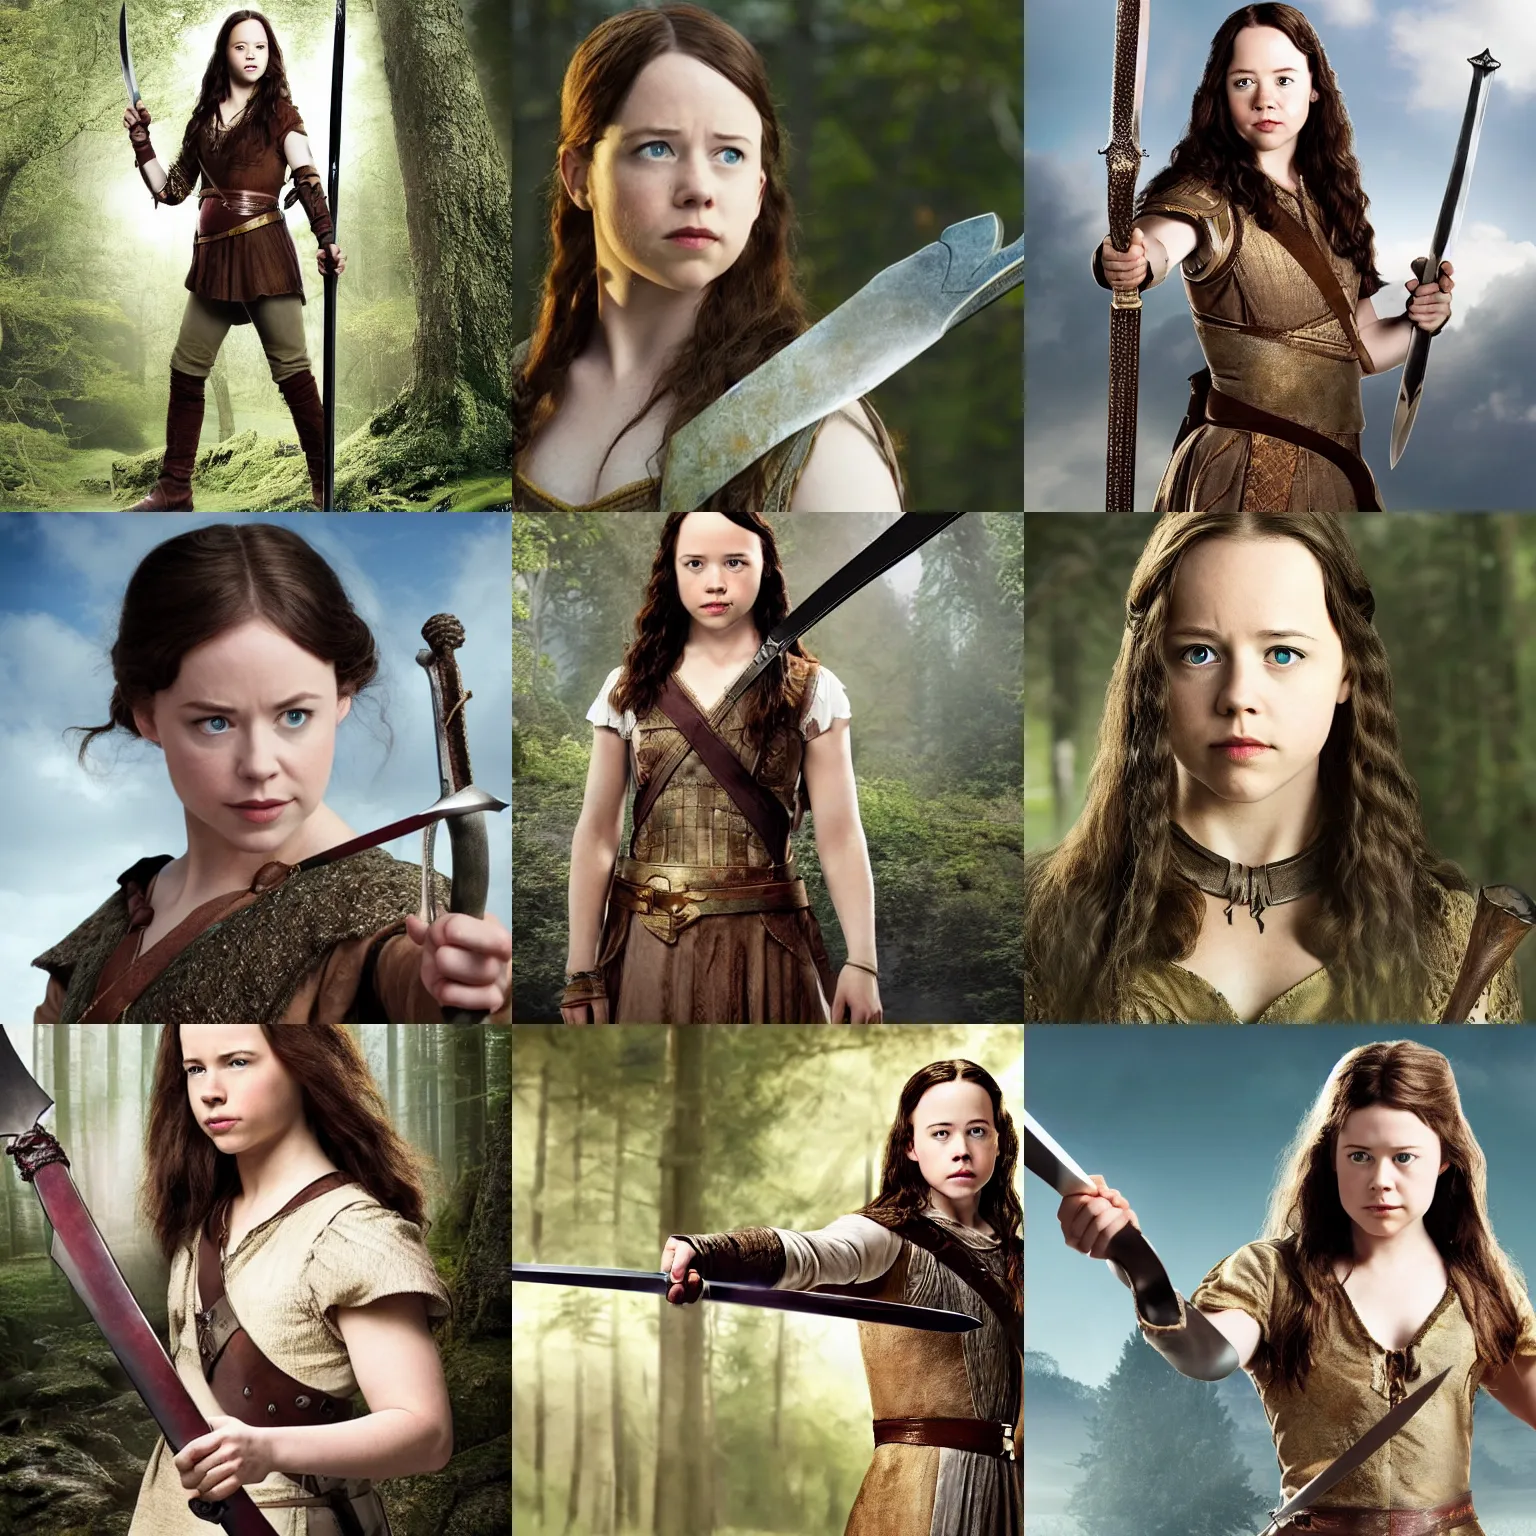 Prompt: Susan Pevensie holding a sword, head and upper body in frame, promotional image